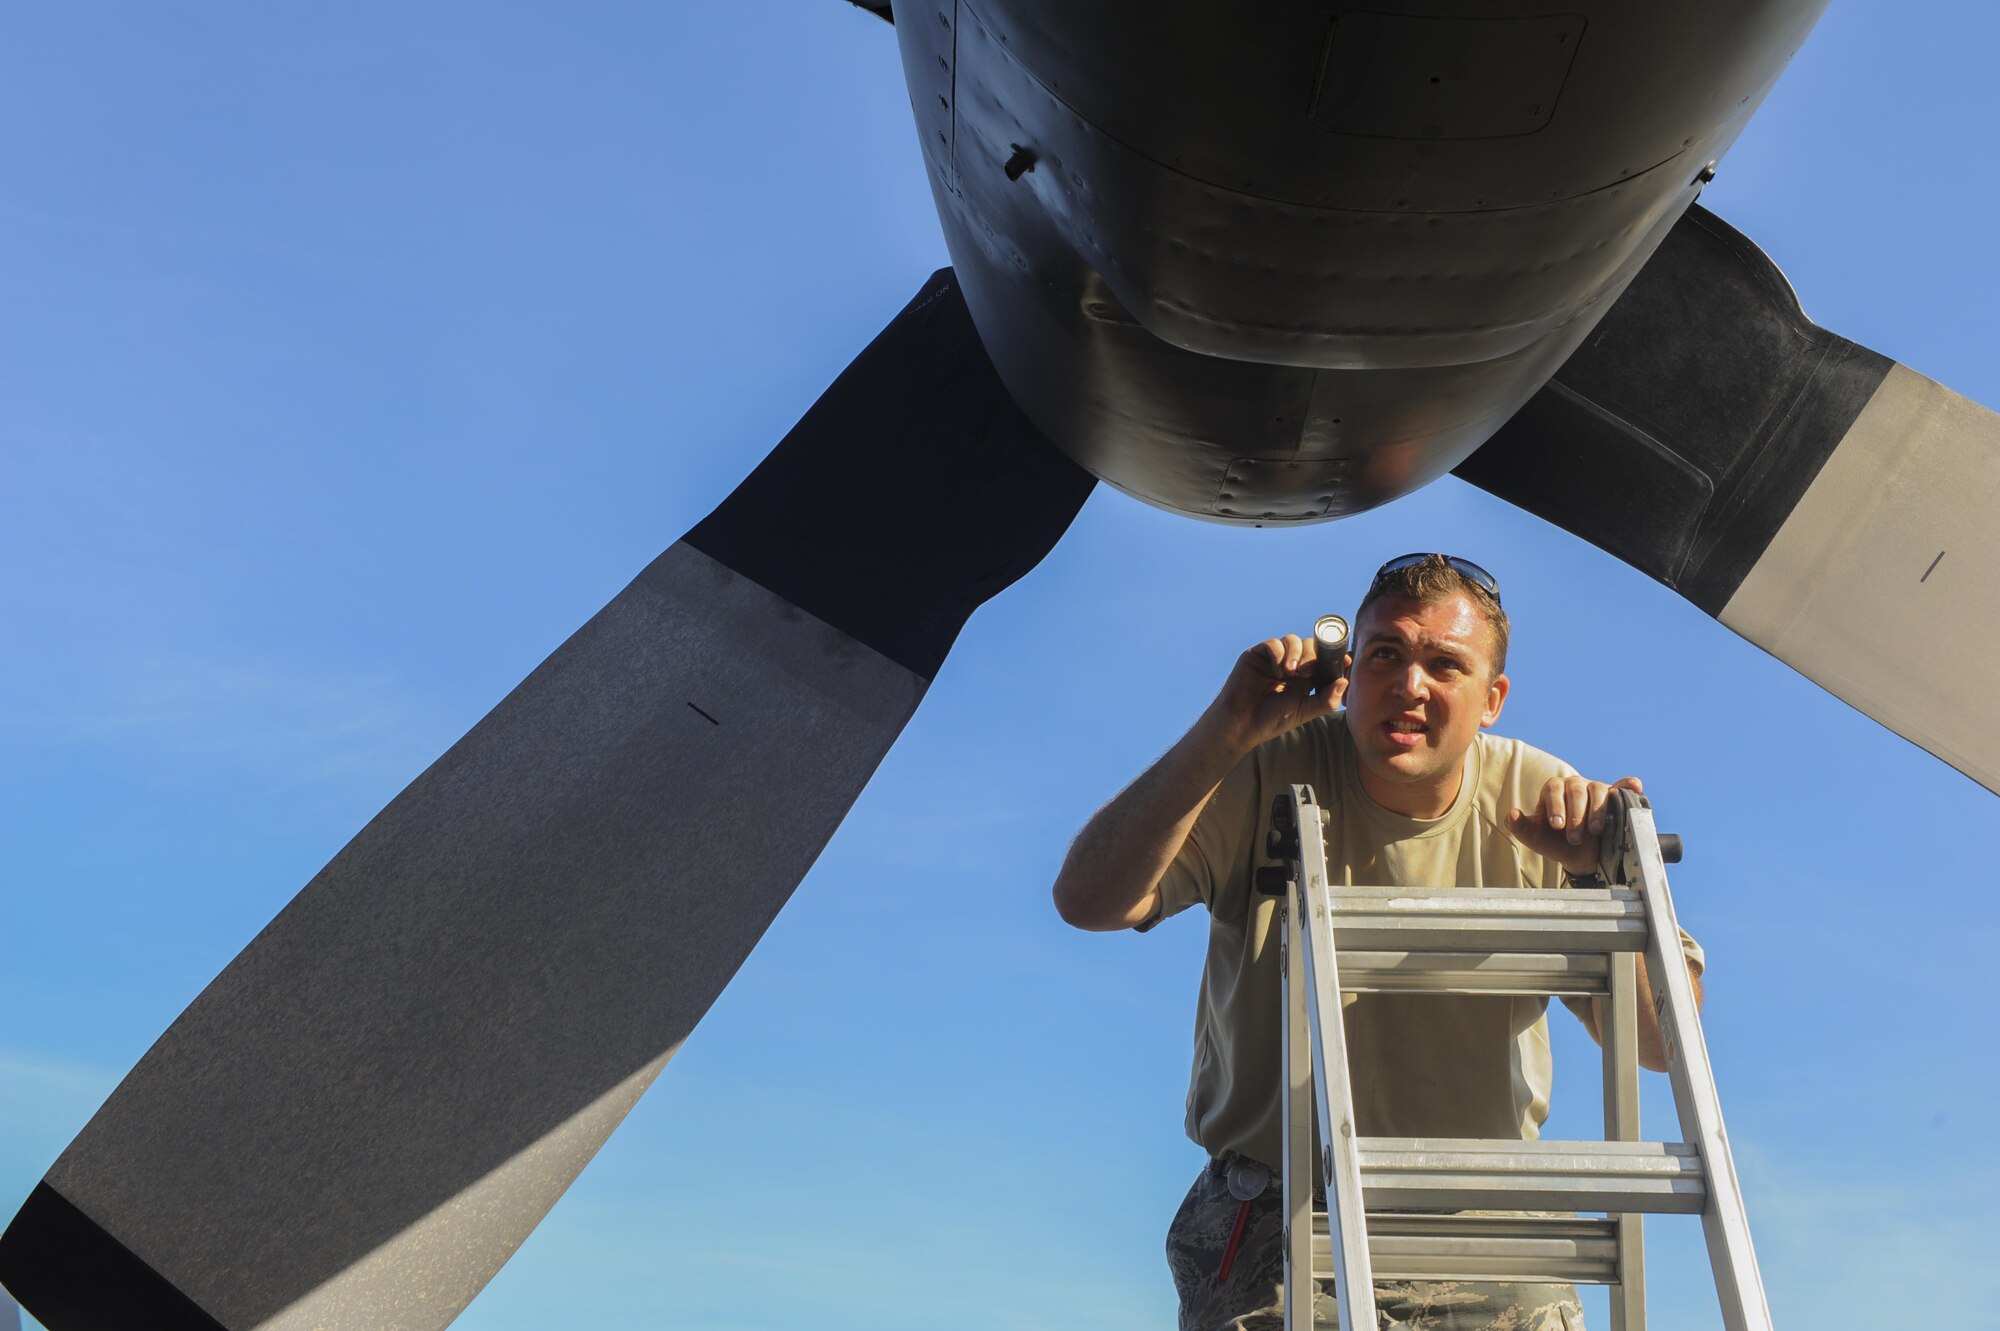 Staff Sgt. Christopher Dawson, a crew chief assigned to the 901st Special Operations Aircraft Maintenance Squadron, fixes a propeller on a MC-130H Combat Talon II aircraft at Hurlburt Field, Fla., July 20, 2016. The MC-130H is equipped with aerial refueling pods to provide in-flight refueling. (U.S. Air Force photo by Airman 1st Class Isaac O. Guest)
